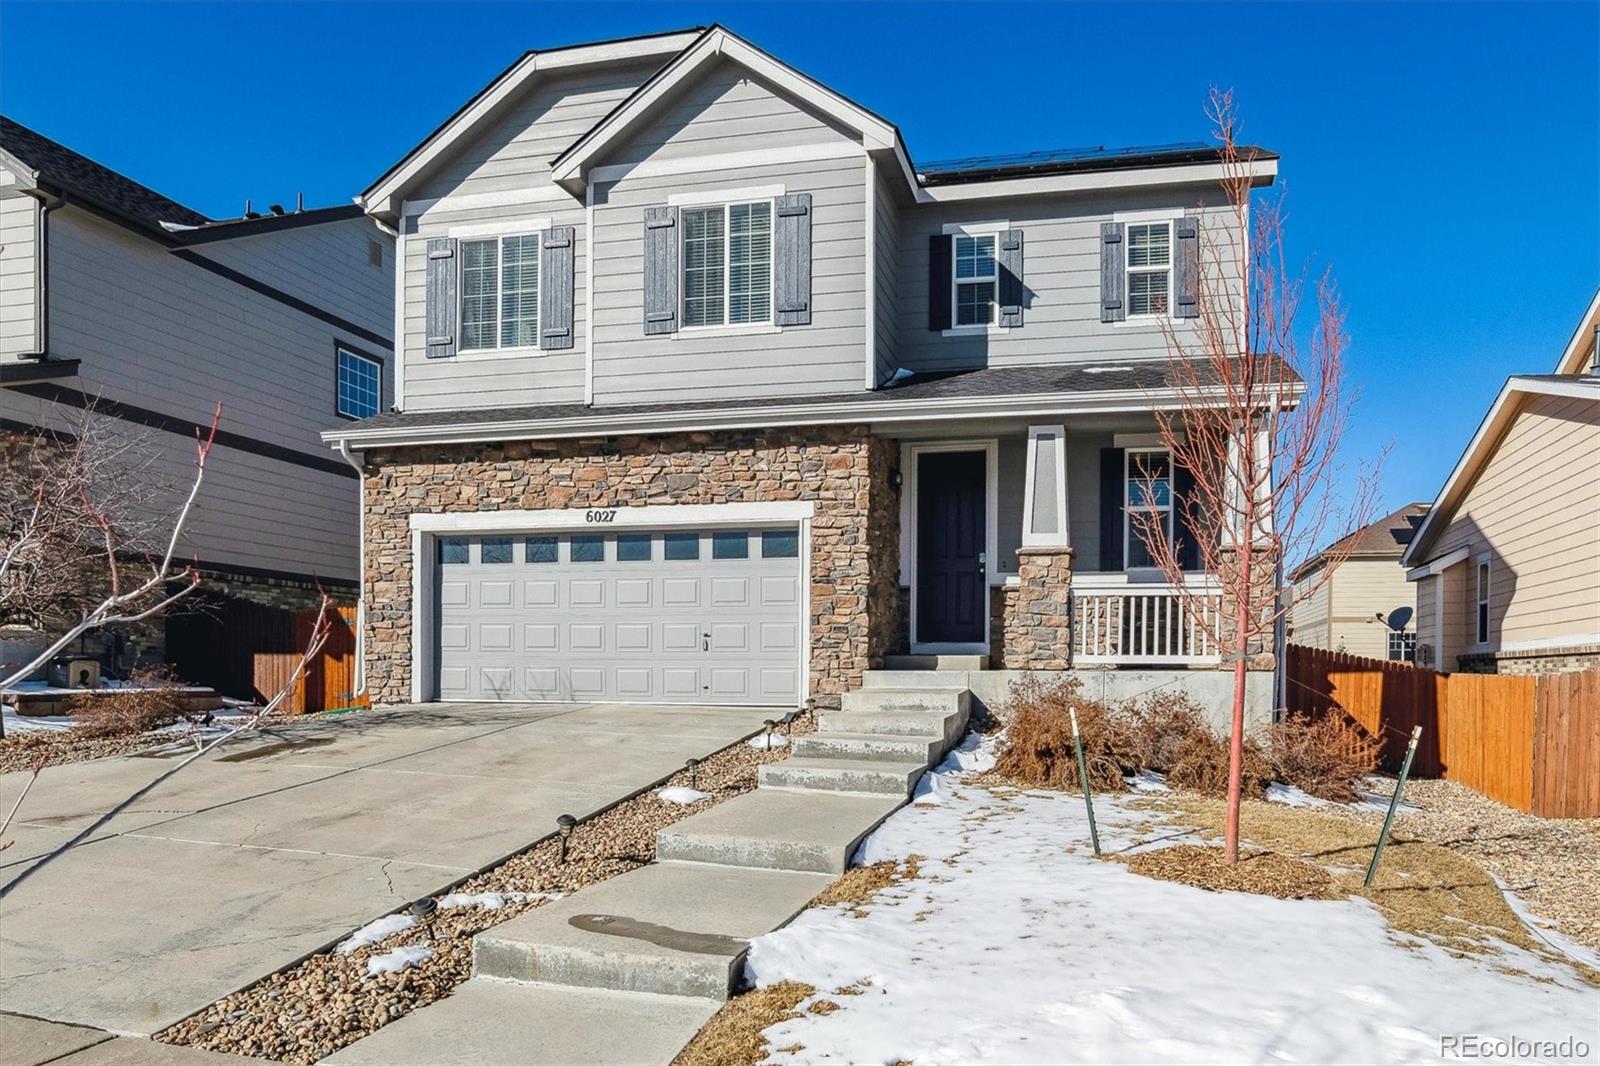 6027 s jamestown way, Aurora sold home. Closed on 2024-04-17 for $647,000.